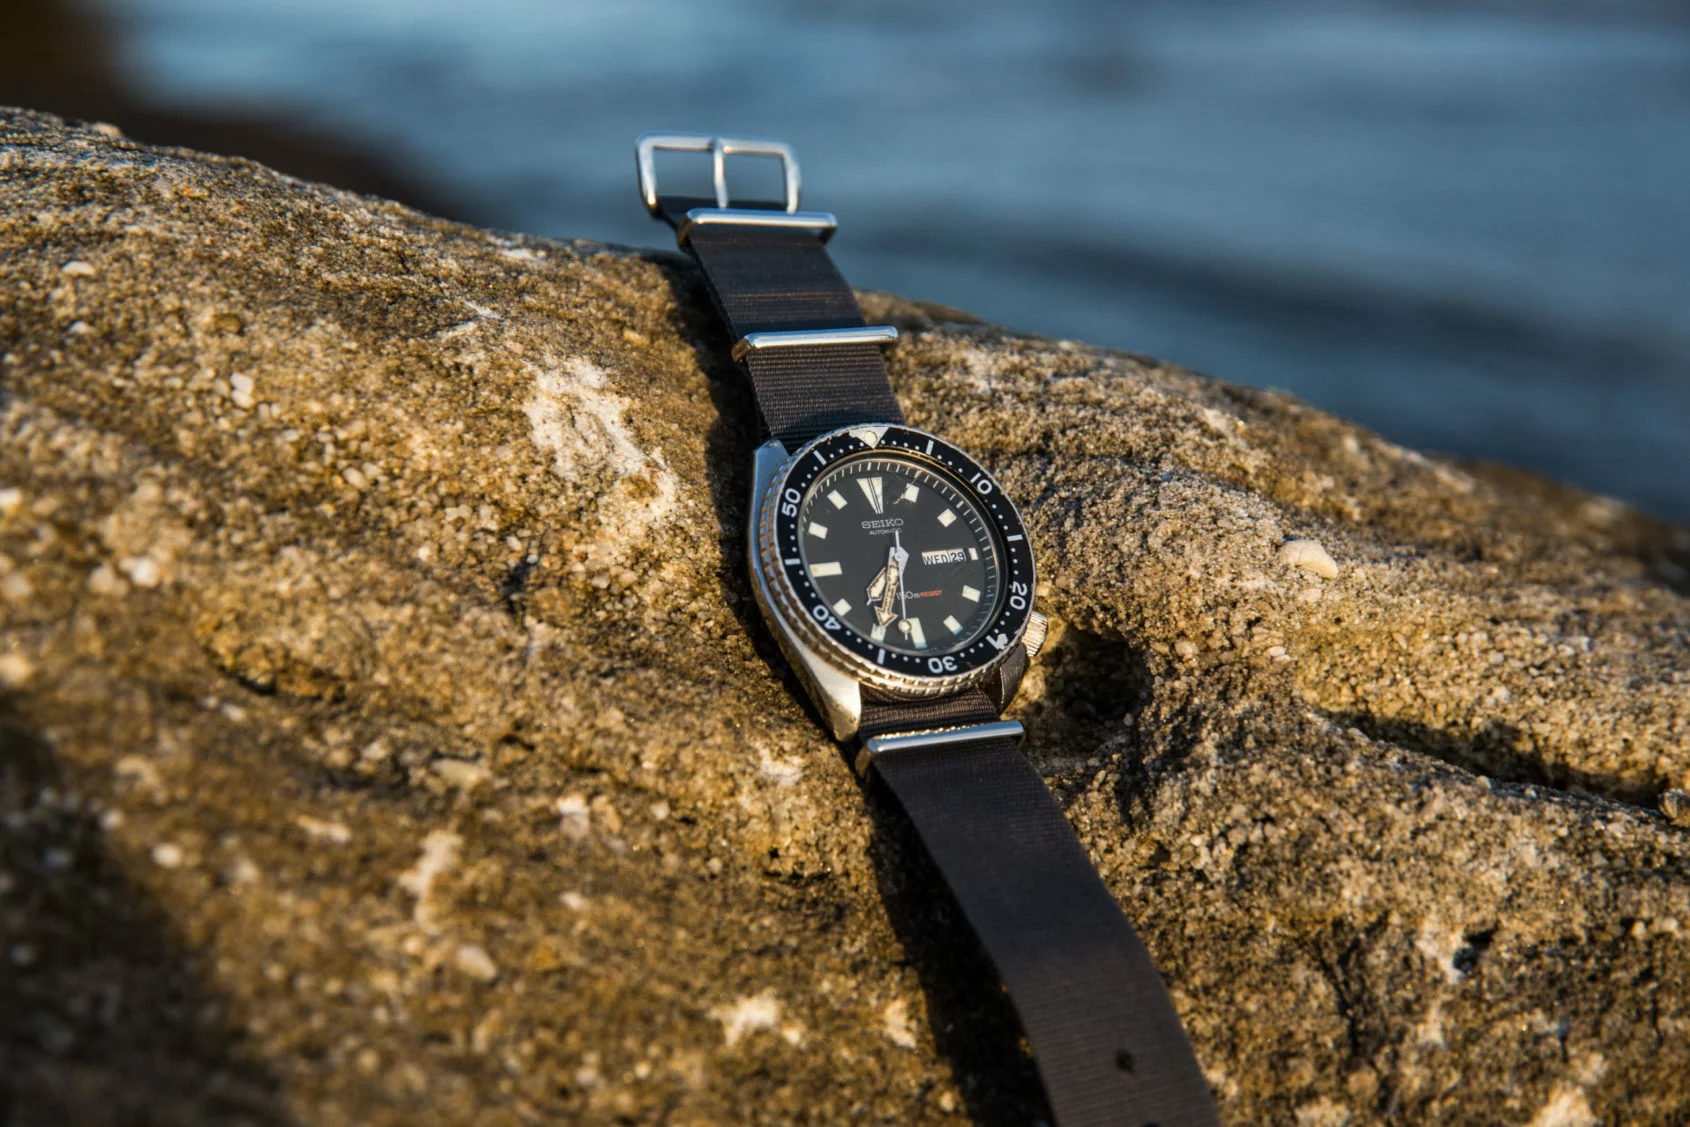 How a Seiko dive watch connected Jack with uncle he never got to meet